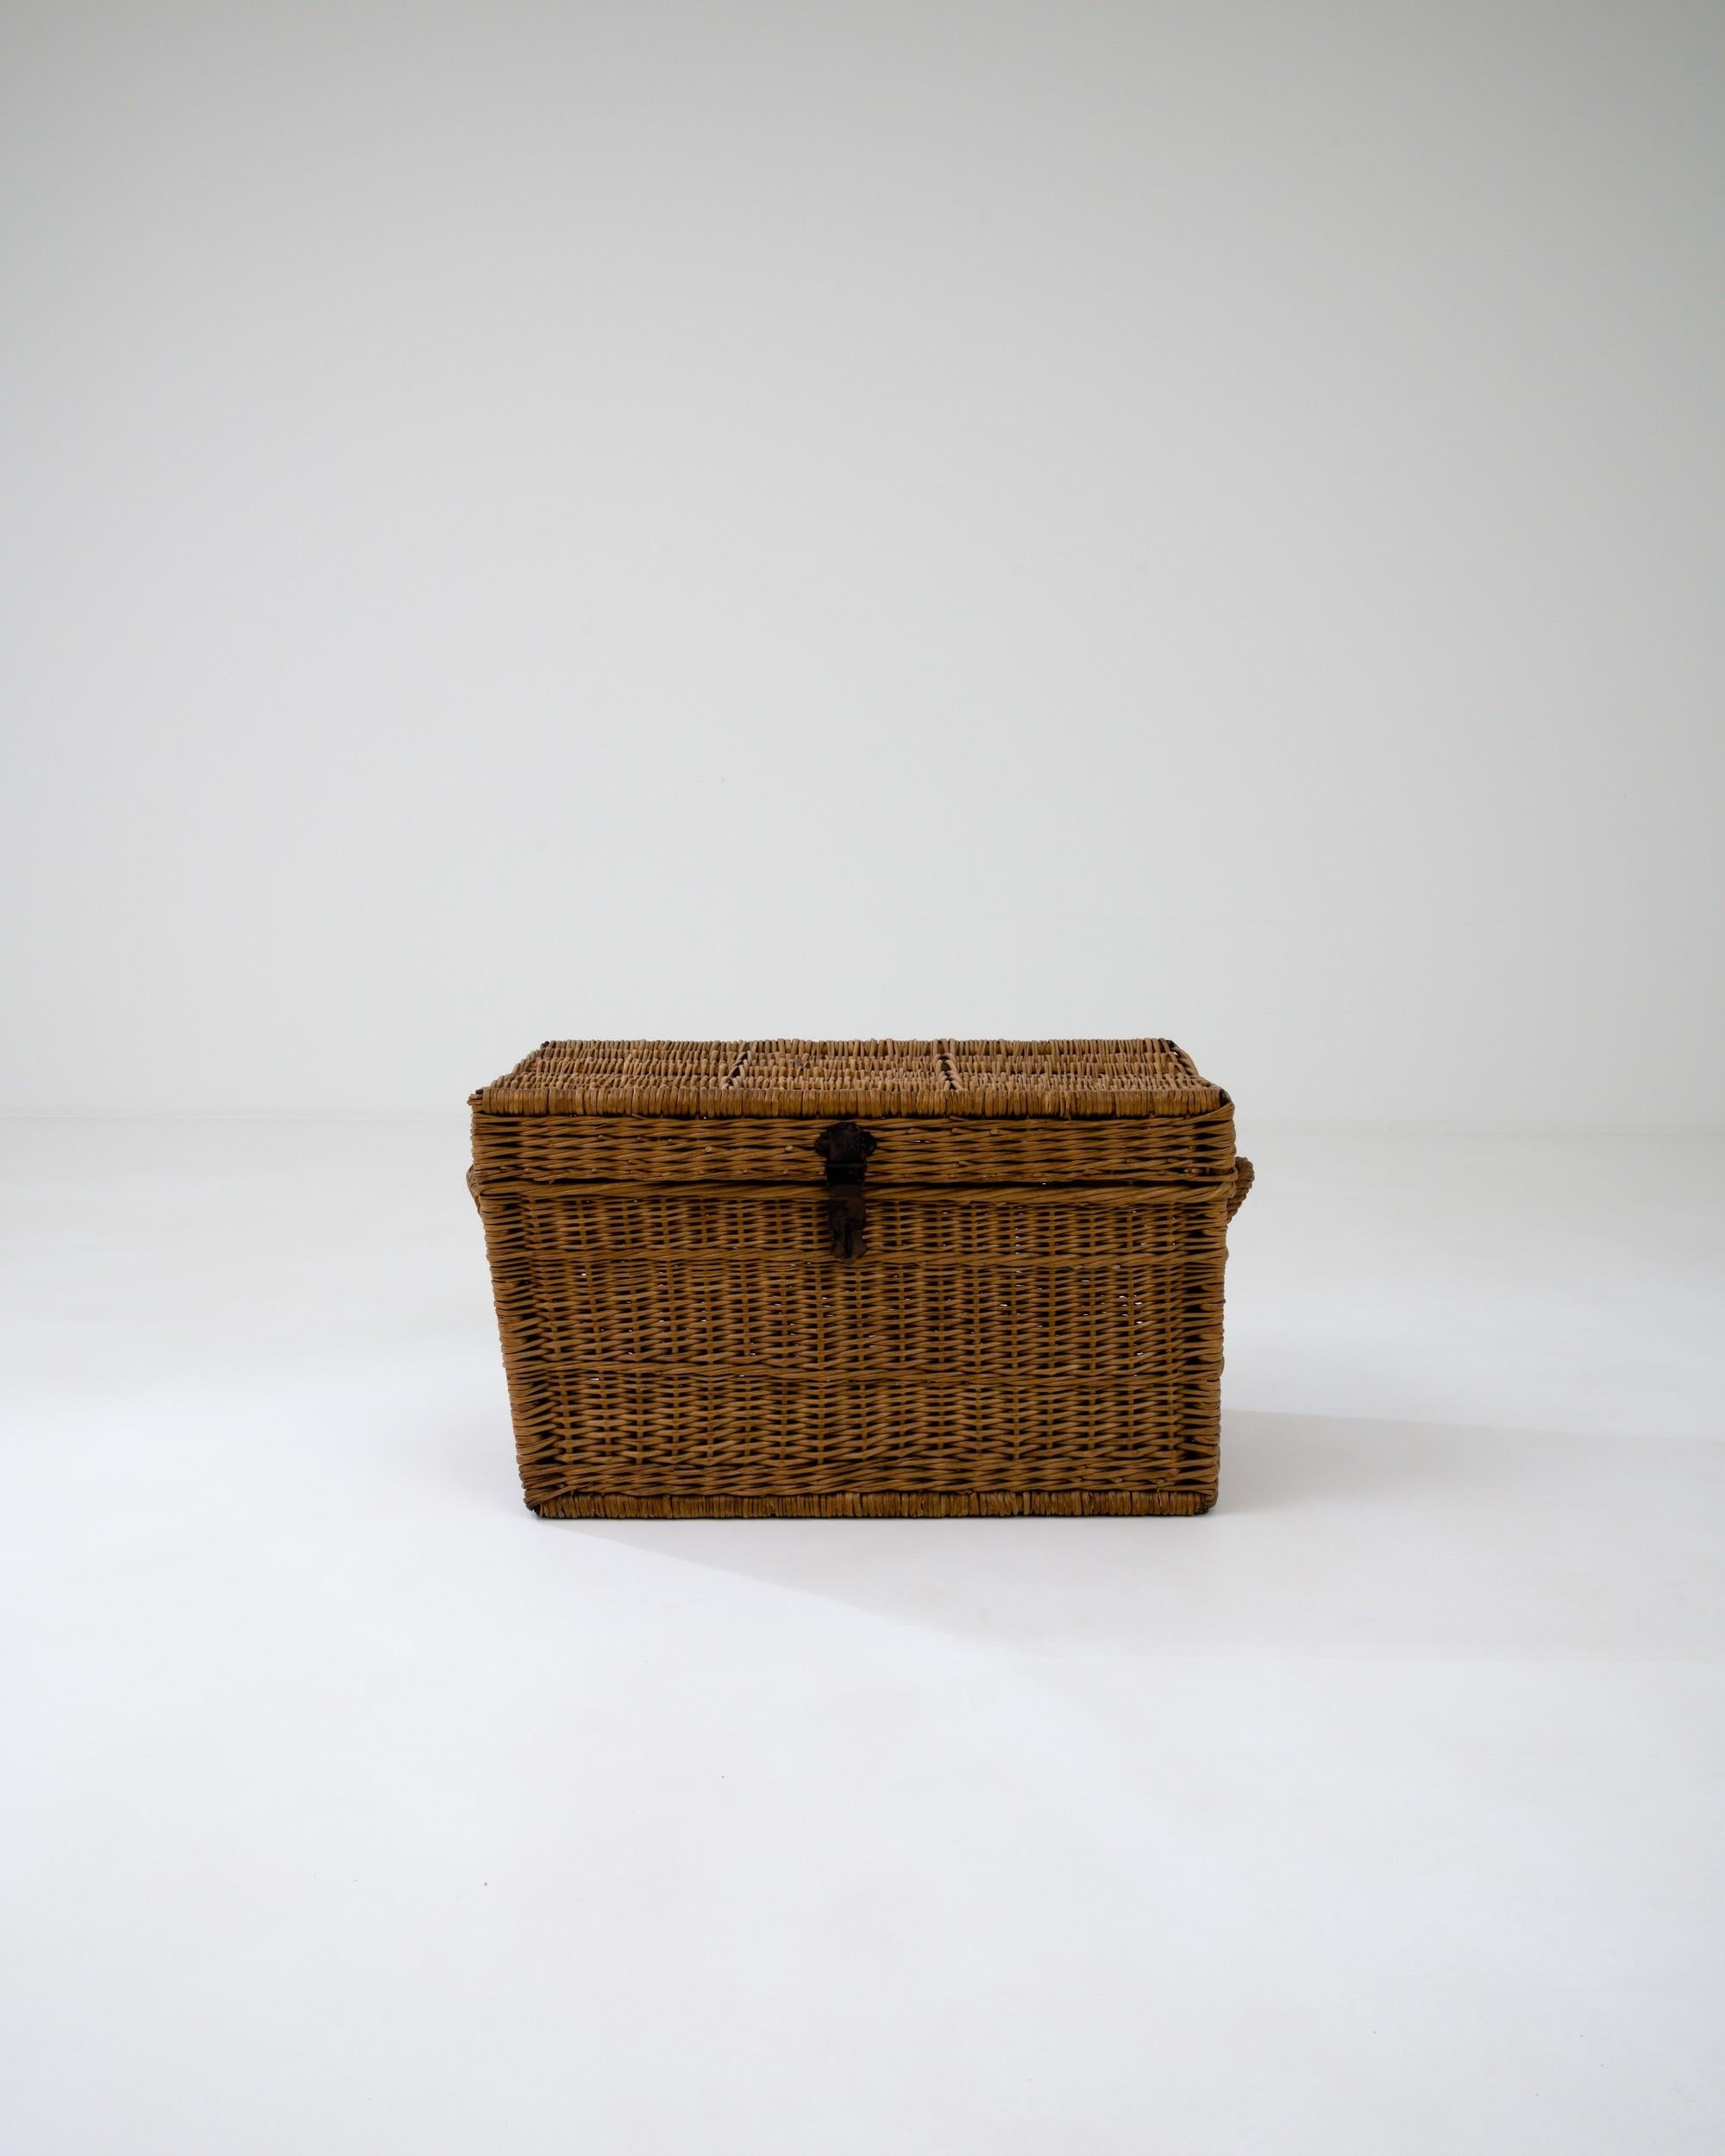 This charming and practical trunk is crafted from woven wicker, celebrated for its strength and flexibility. The intricate pattern on the rectangular base serves both an aesthetic and functional purpose, enhancing the trunk's durability. The chest